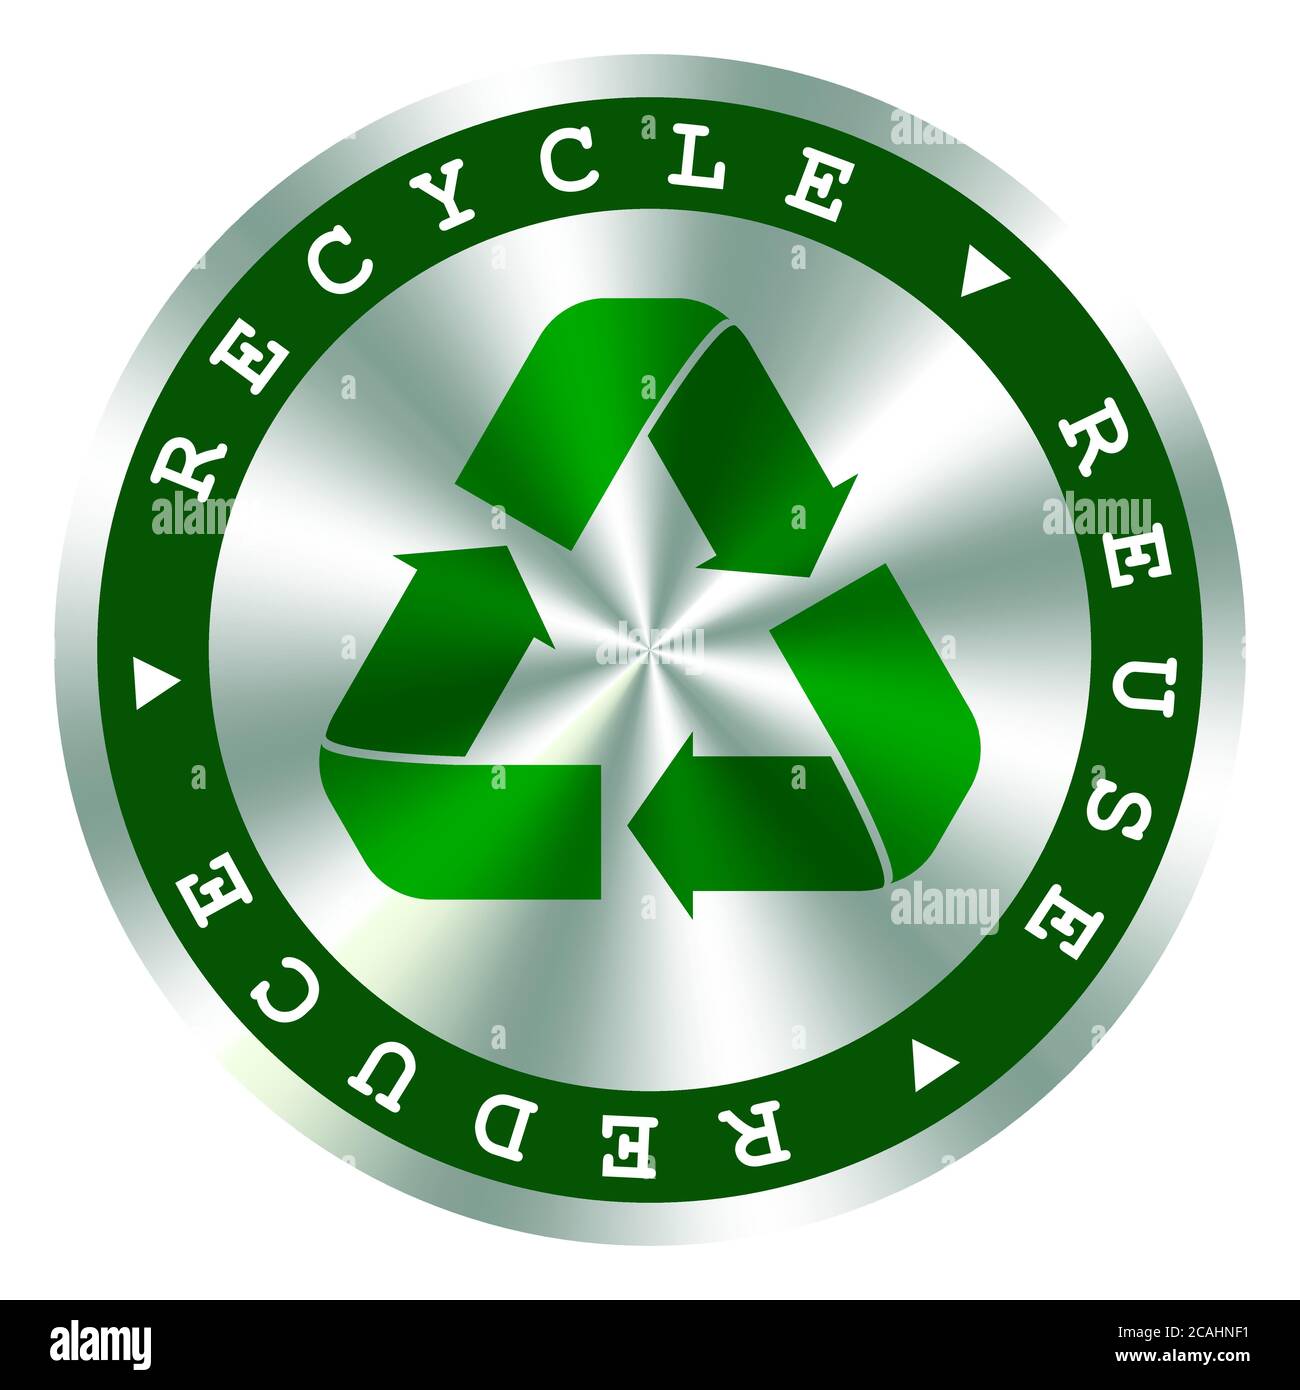 109,225 Reduce Reuse Recycle Images, Stock Photos, 3D objects, & Vectors